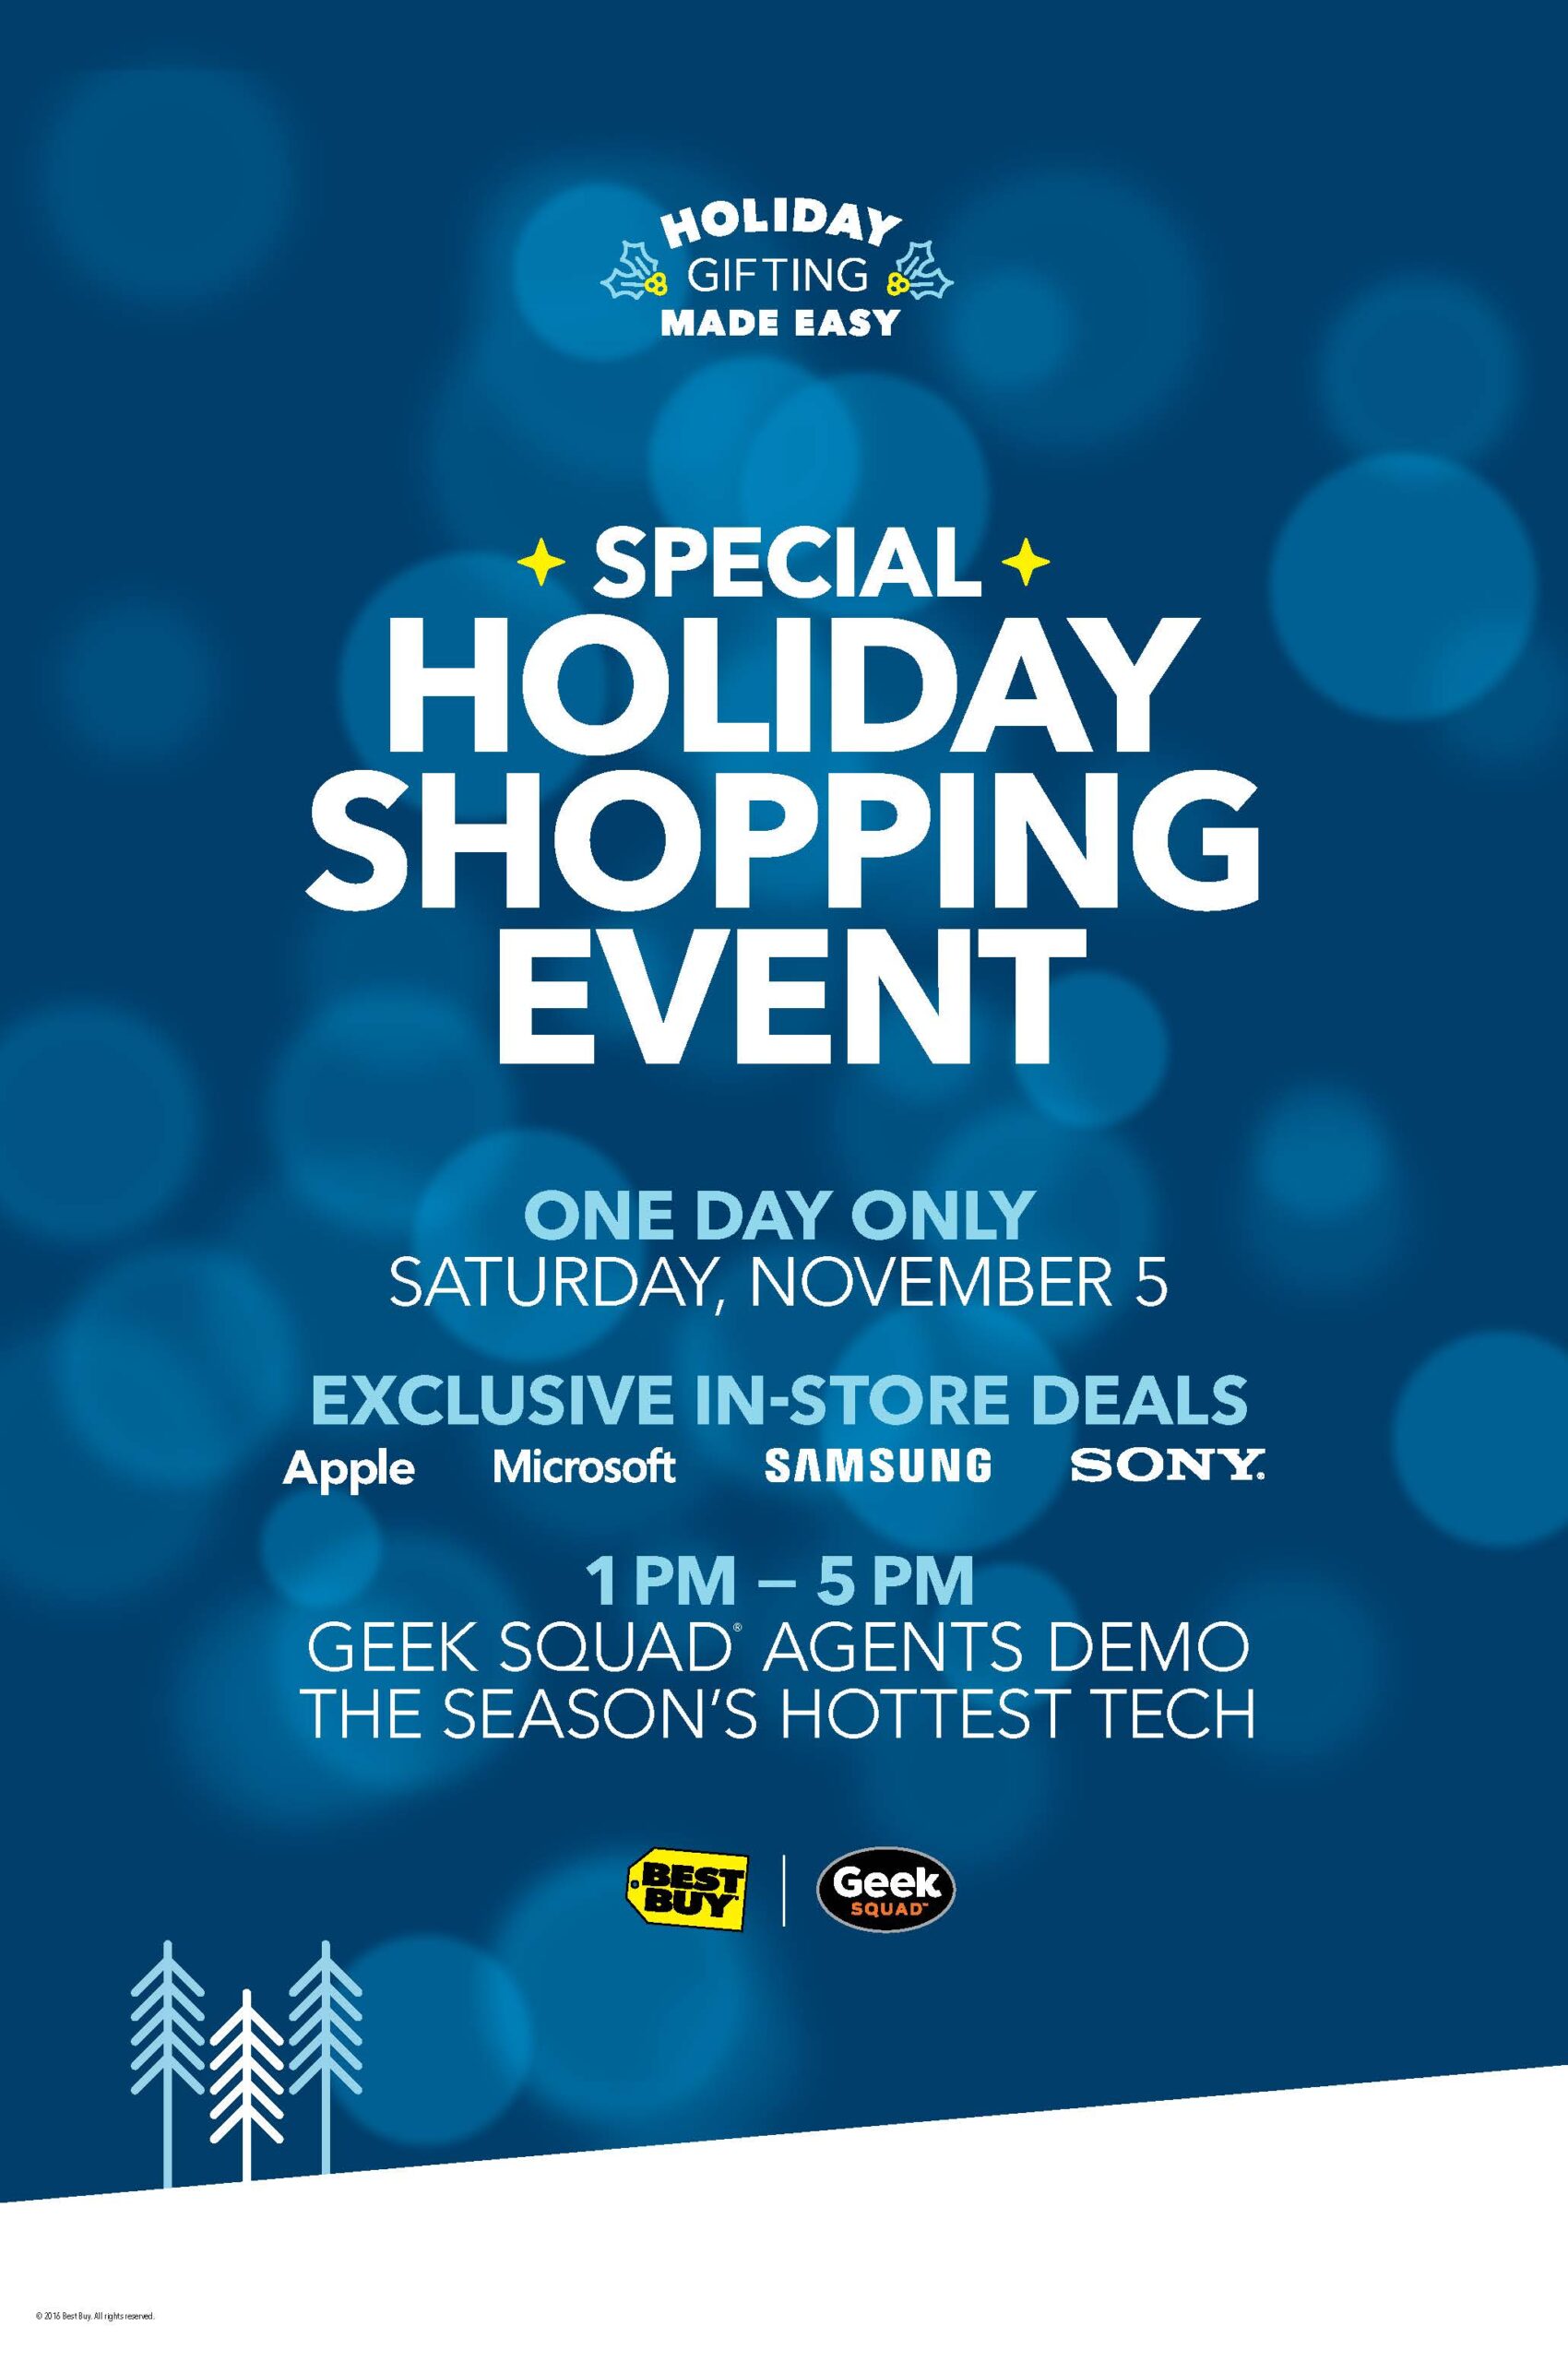 Take The Stress Out Of Shopping With The BestBuy Holiday Shopping Event